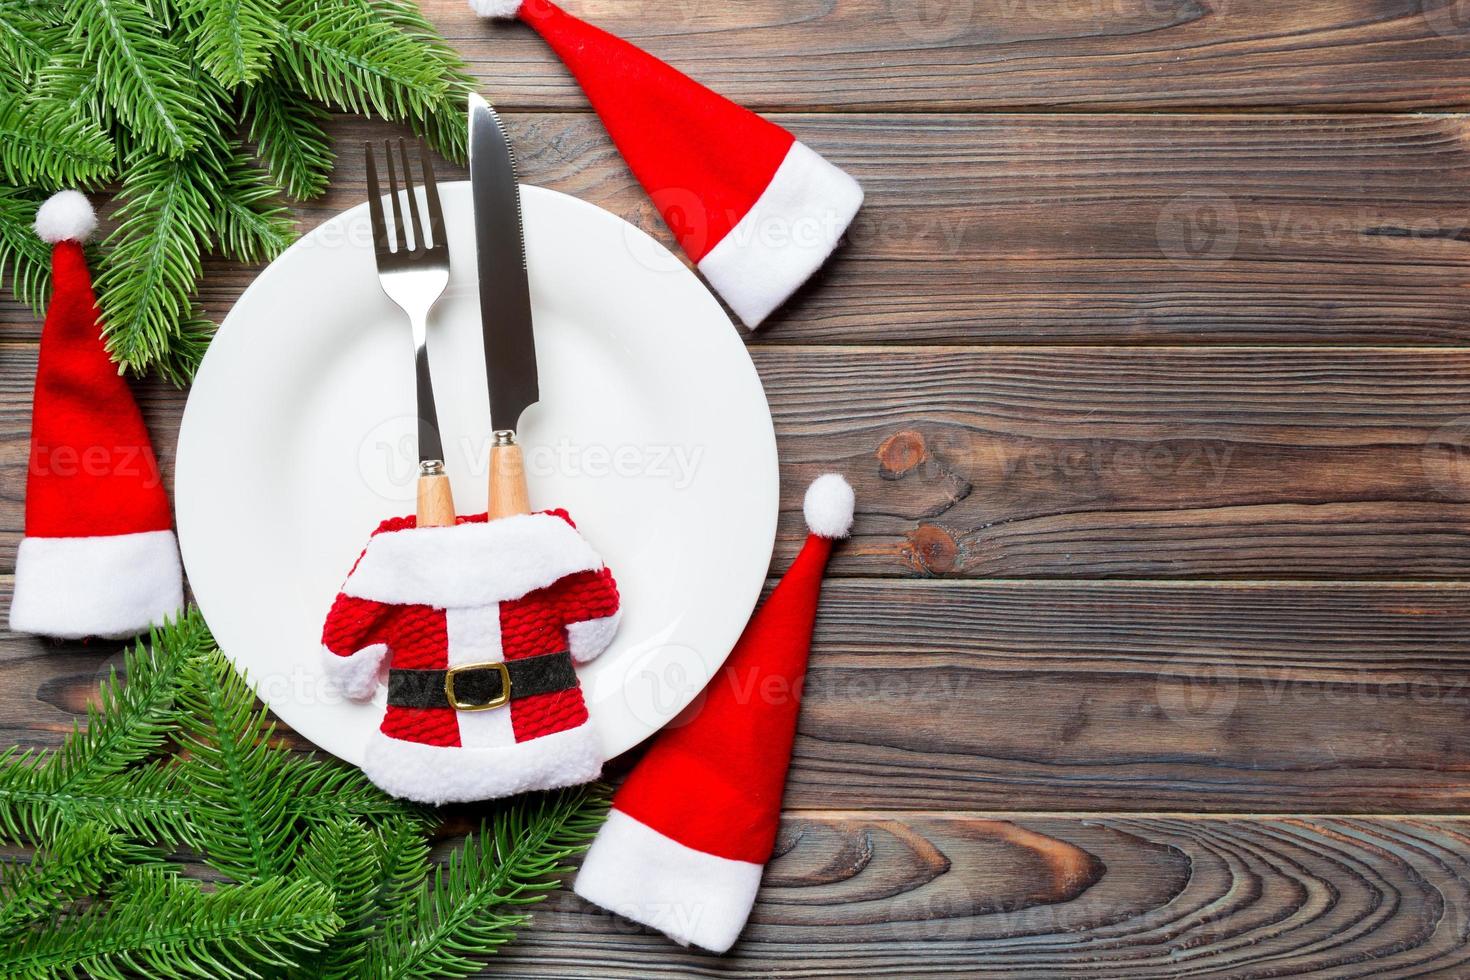 Holiday composition of plate and flatware decorated with Santa hat and clothes on wooden background. Top view of Christmas decorations with empty space for your design. Festive time concept photo